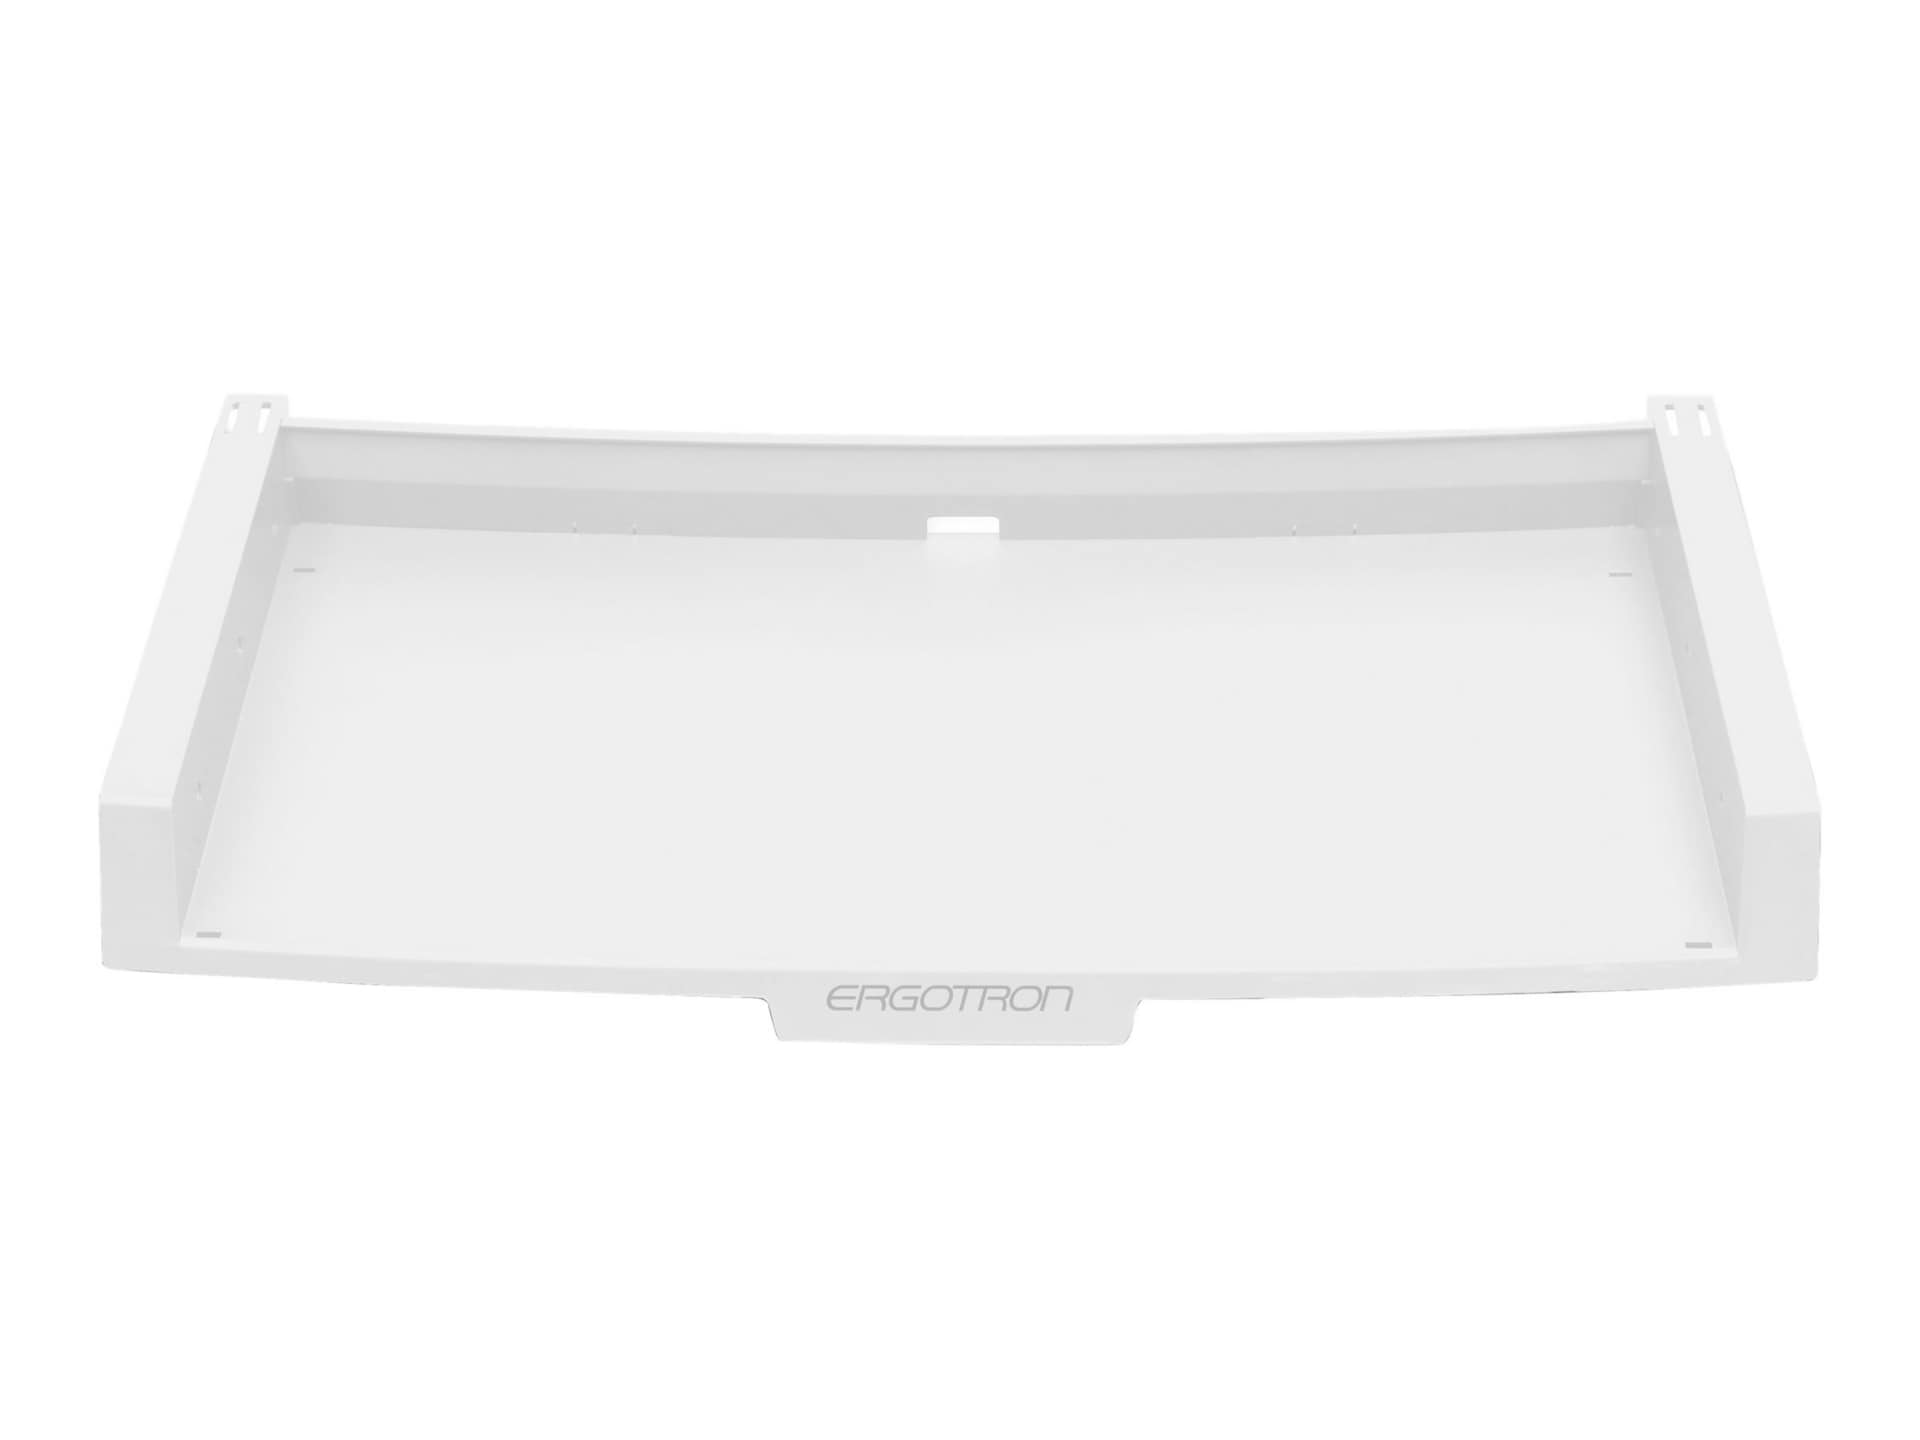 Ergotron Keyboard Tray with Debris Barrier Upgrade Kit mounting component - for keyboard / mouse - white